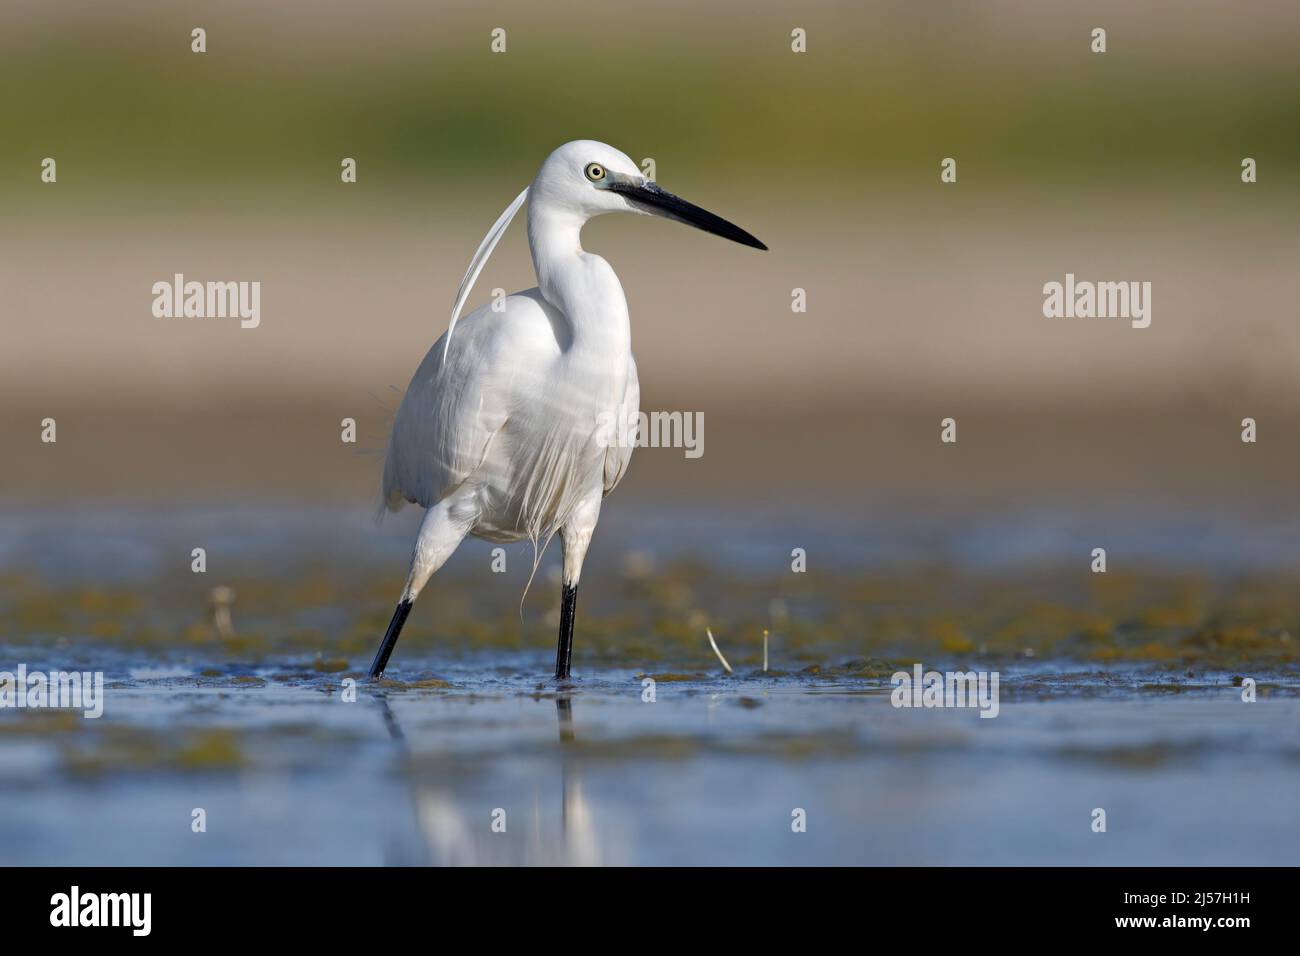 Little egret, Fiumicino (RM), Italy, May 2017 Stock Photo